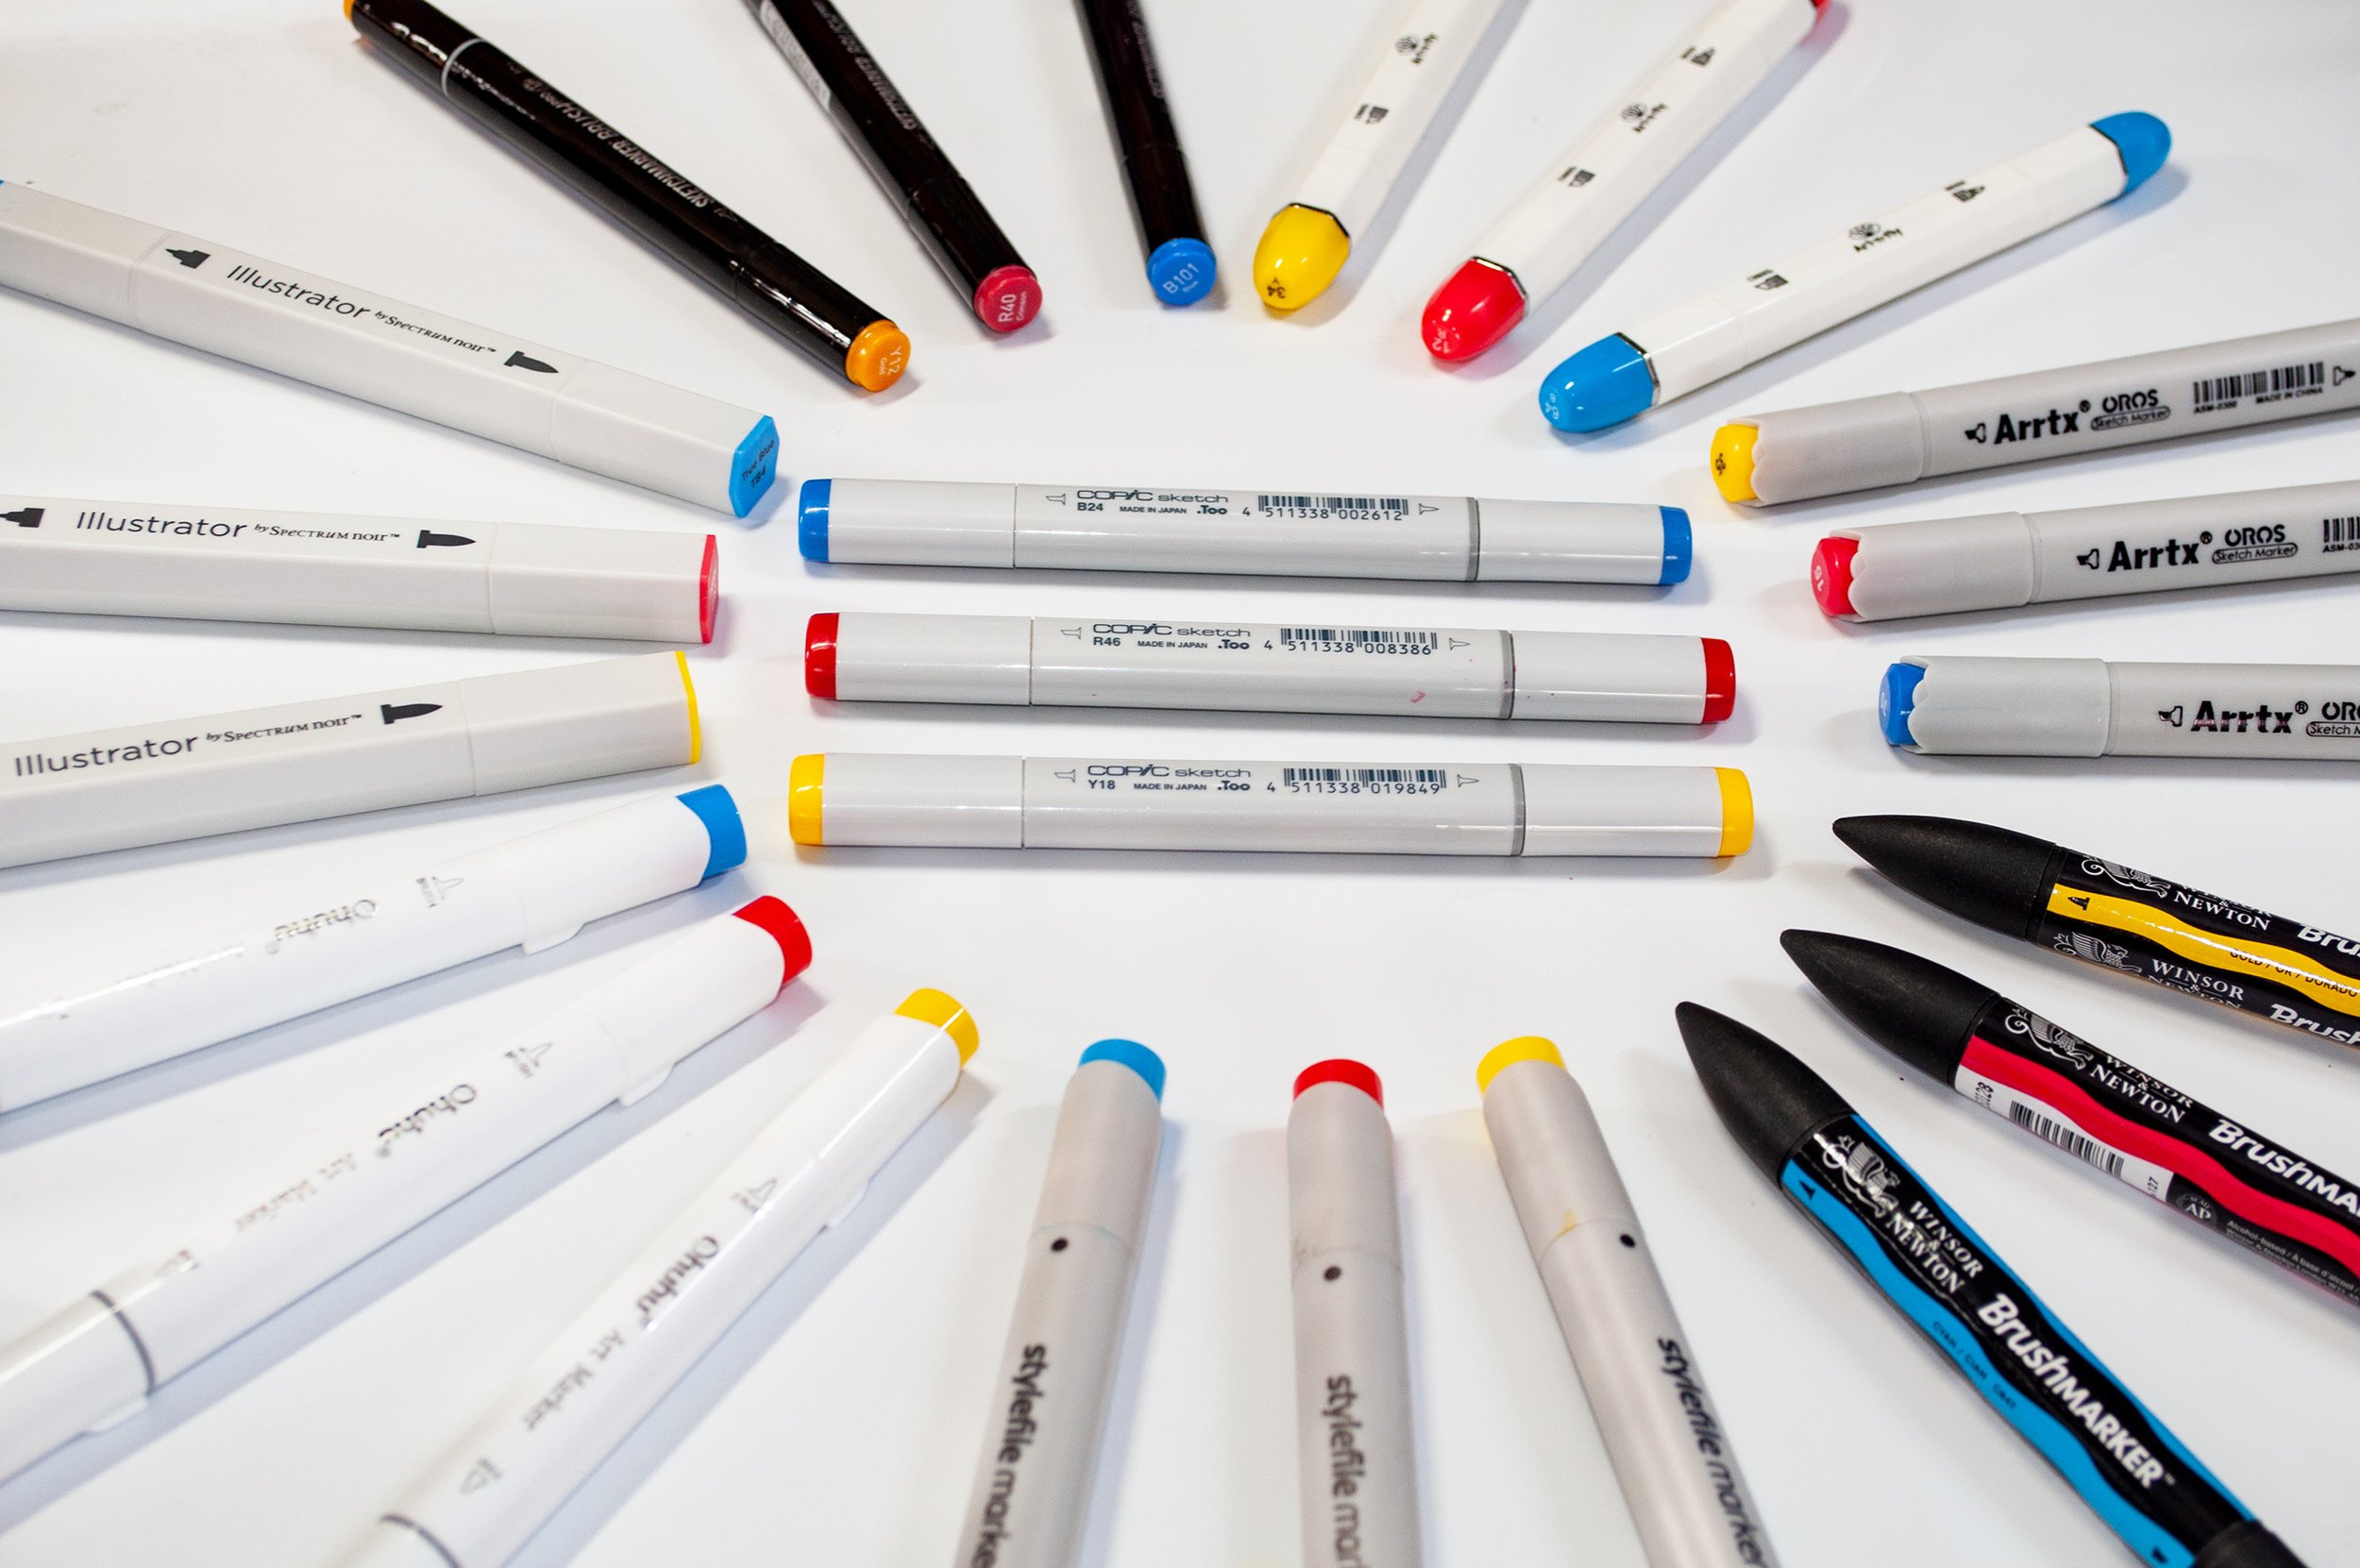 Can you blend copic markers with other brands? - Quora